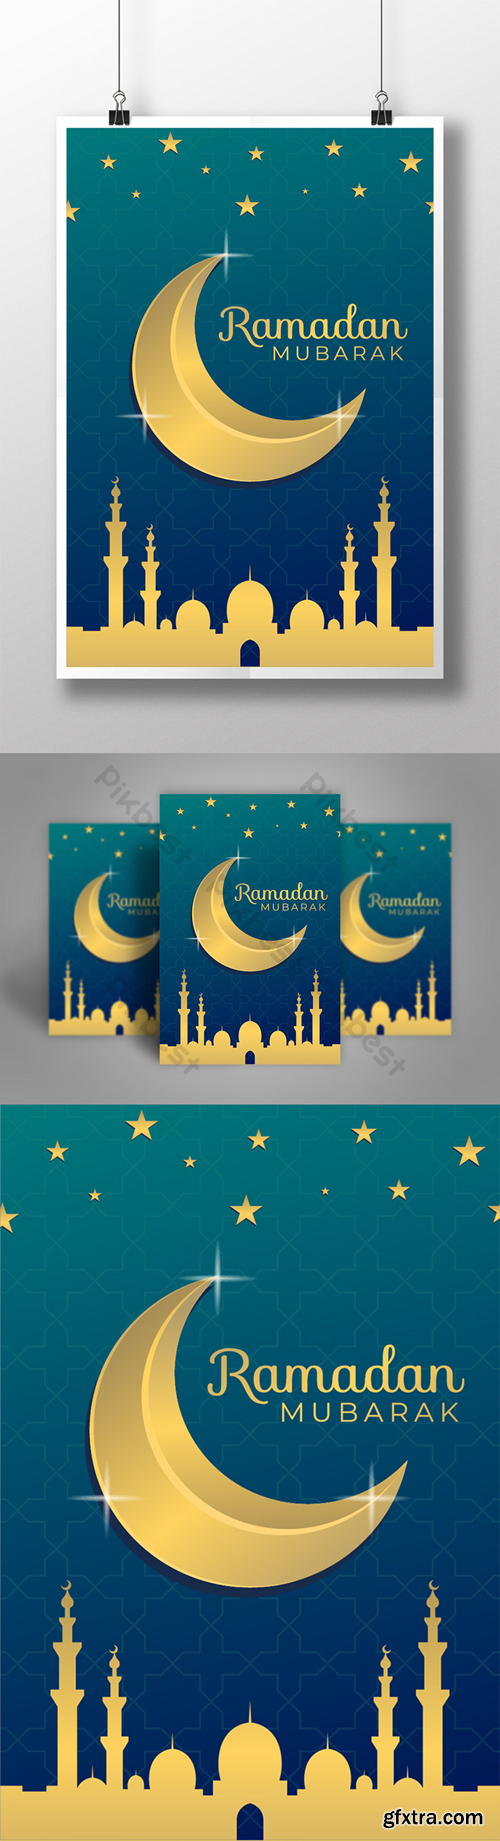 Ramadan Poster Template With Gold Crescent Moon and Mosque Template PSD